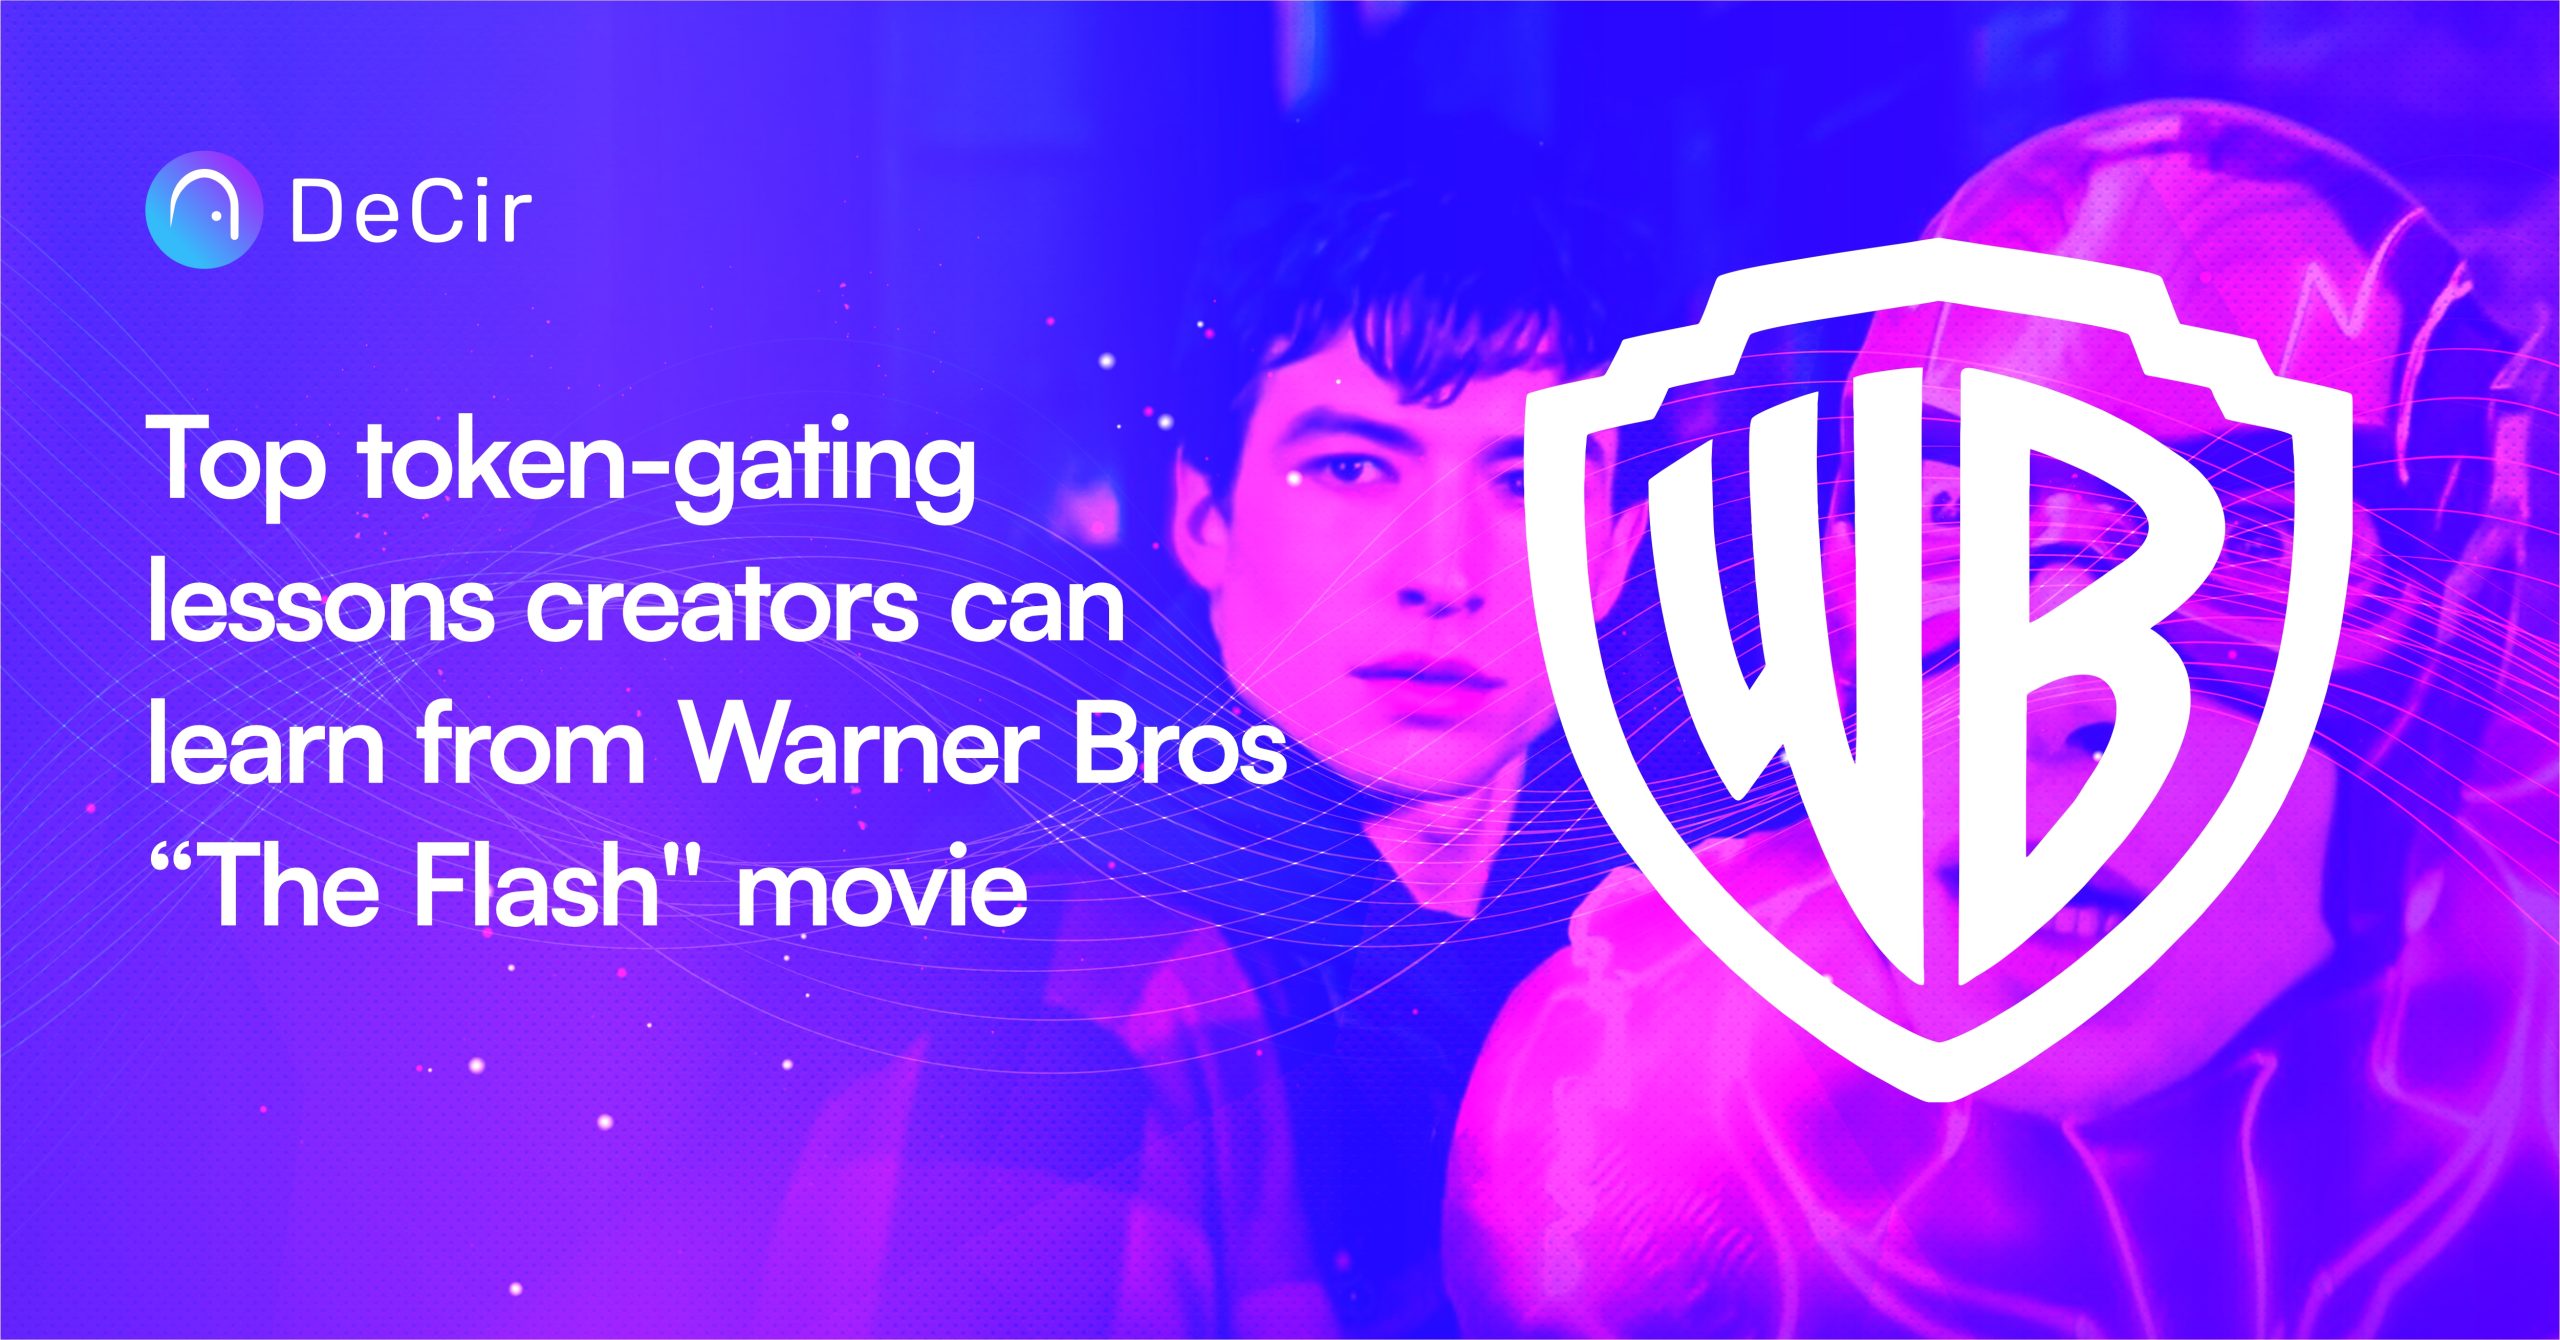 Lessons for creators from Warner Bros "The Flash" movie